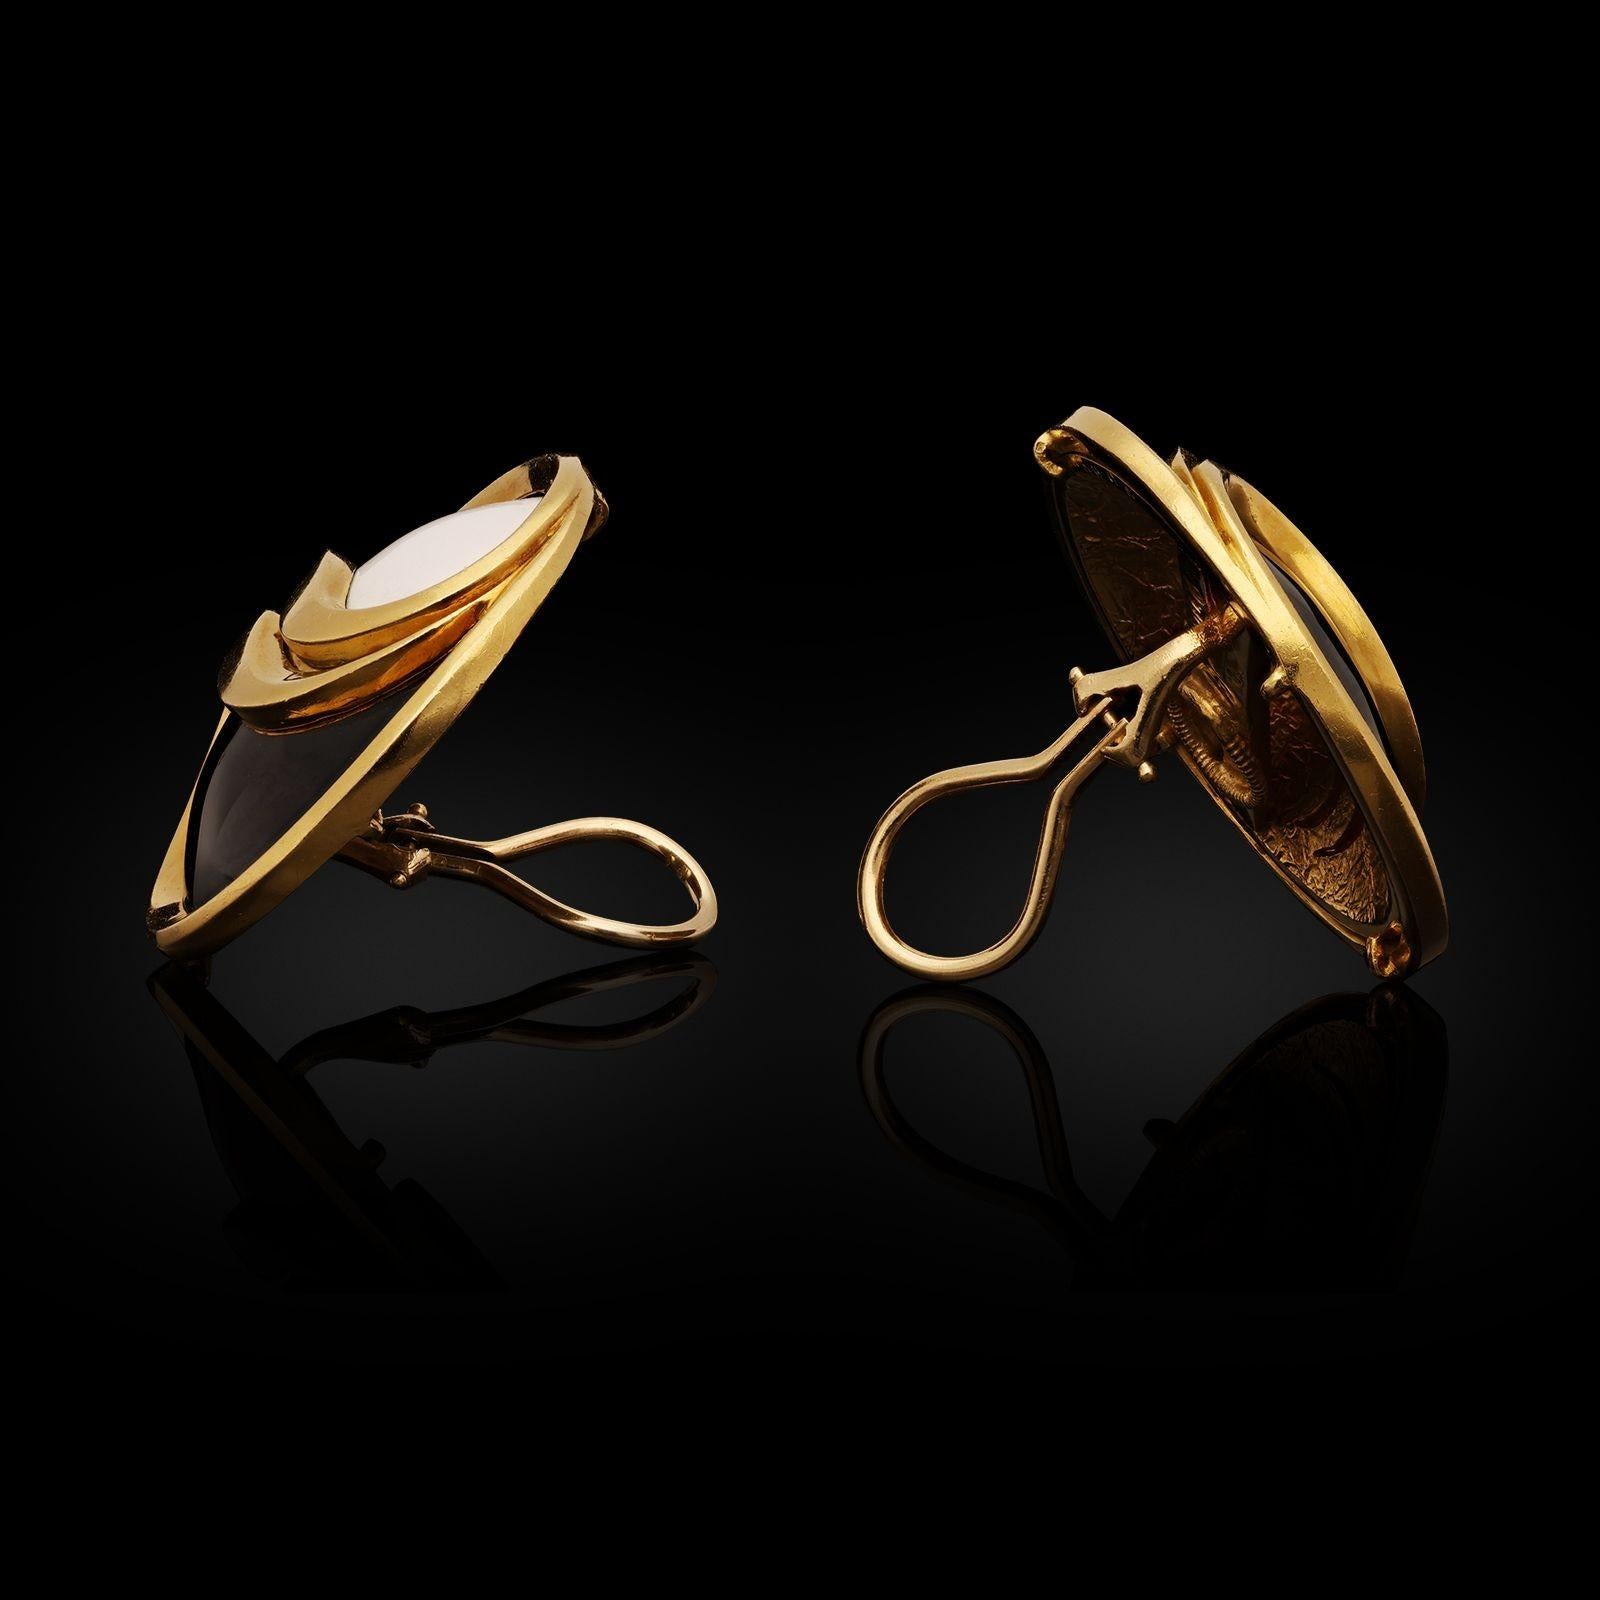 A bold pair of Yin and Yang gold and enamel earrings by Cartier c.1980s, each earring formed as a large round disc with domed profile in 18ct gold, the front bisected by a double row gold swirl, one half filled with white enamel and the other black